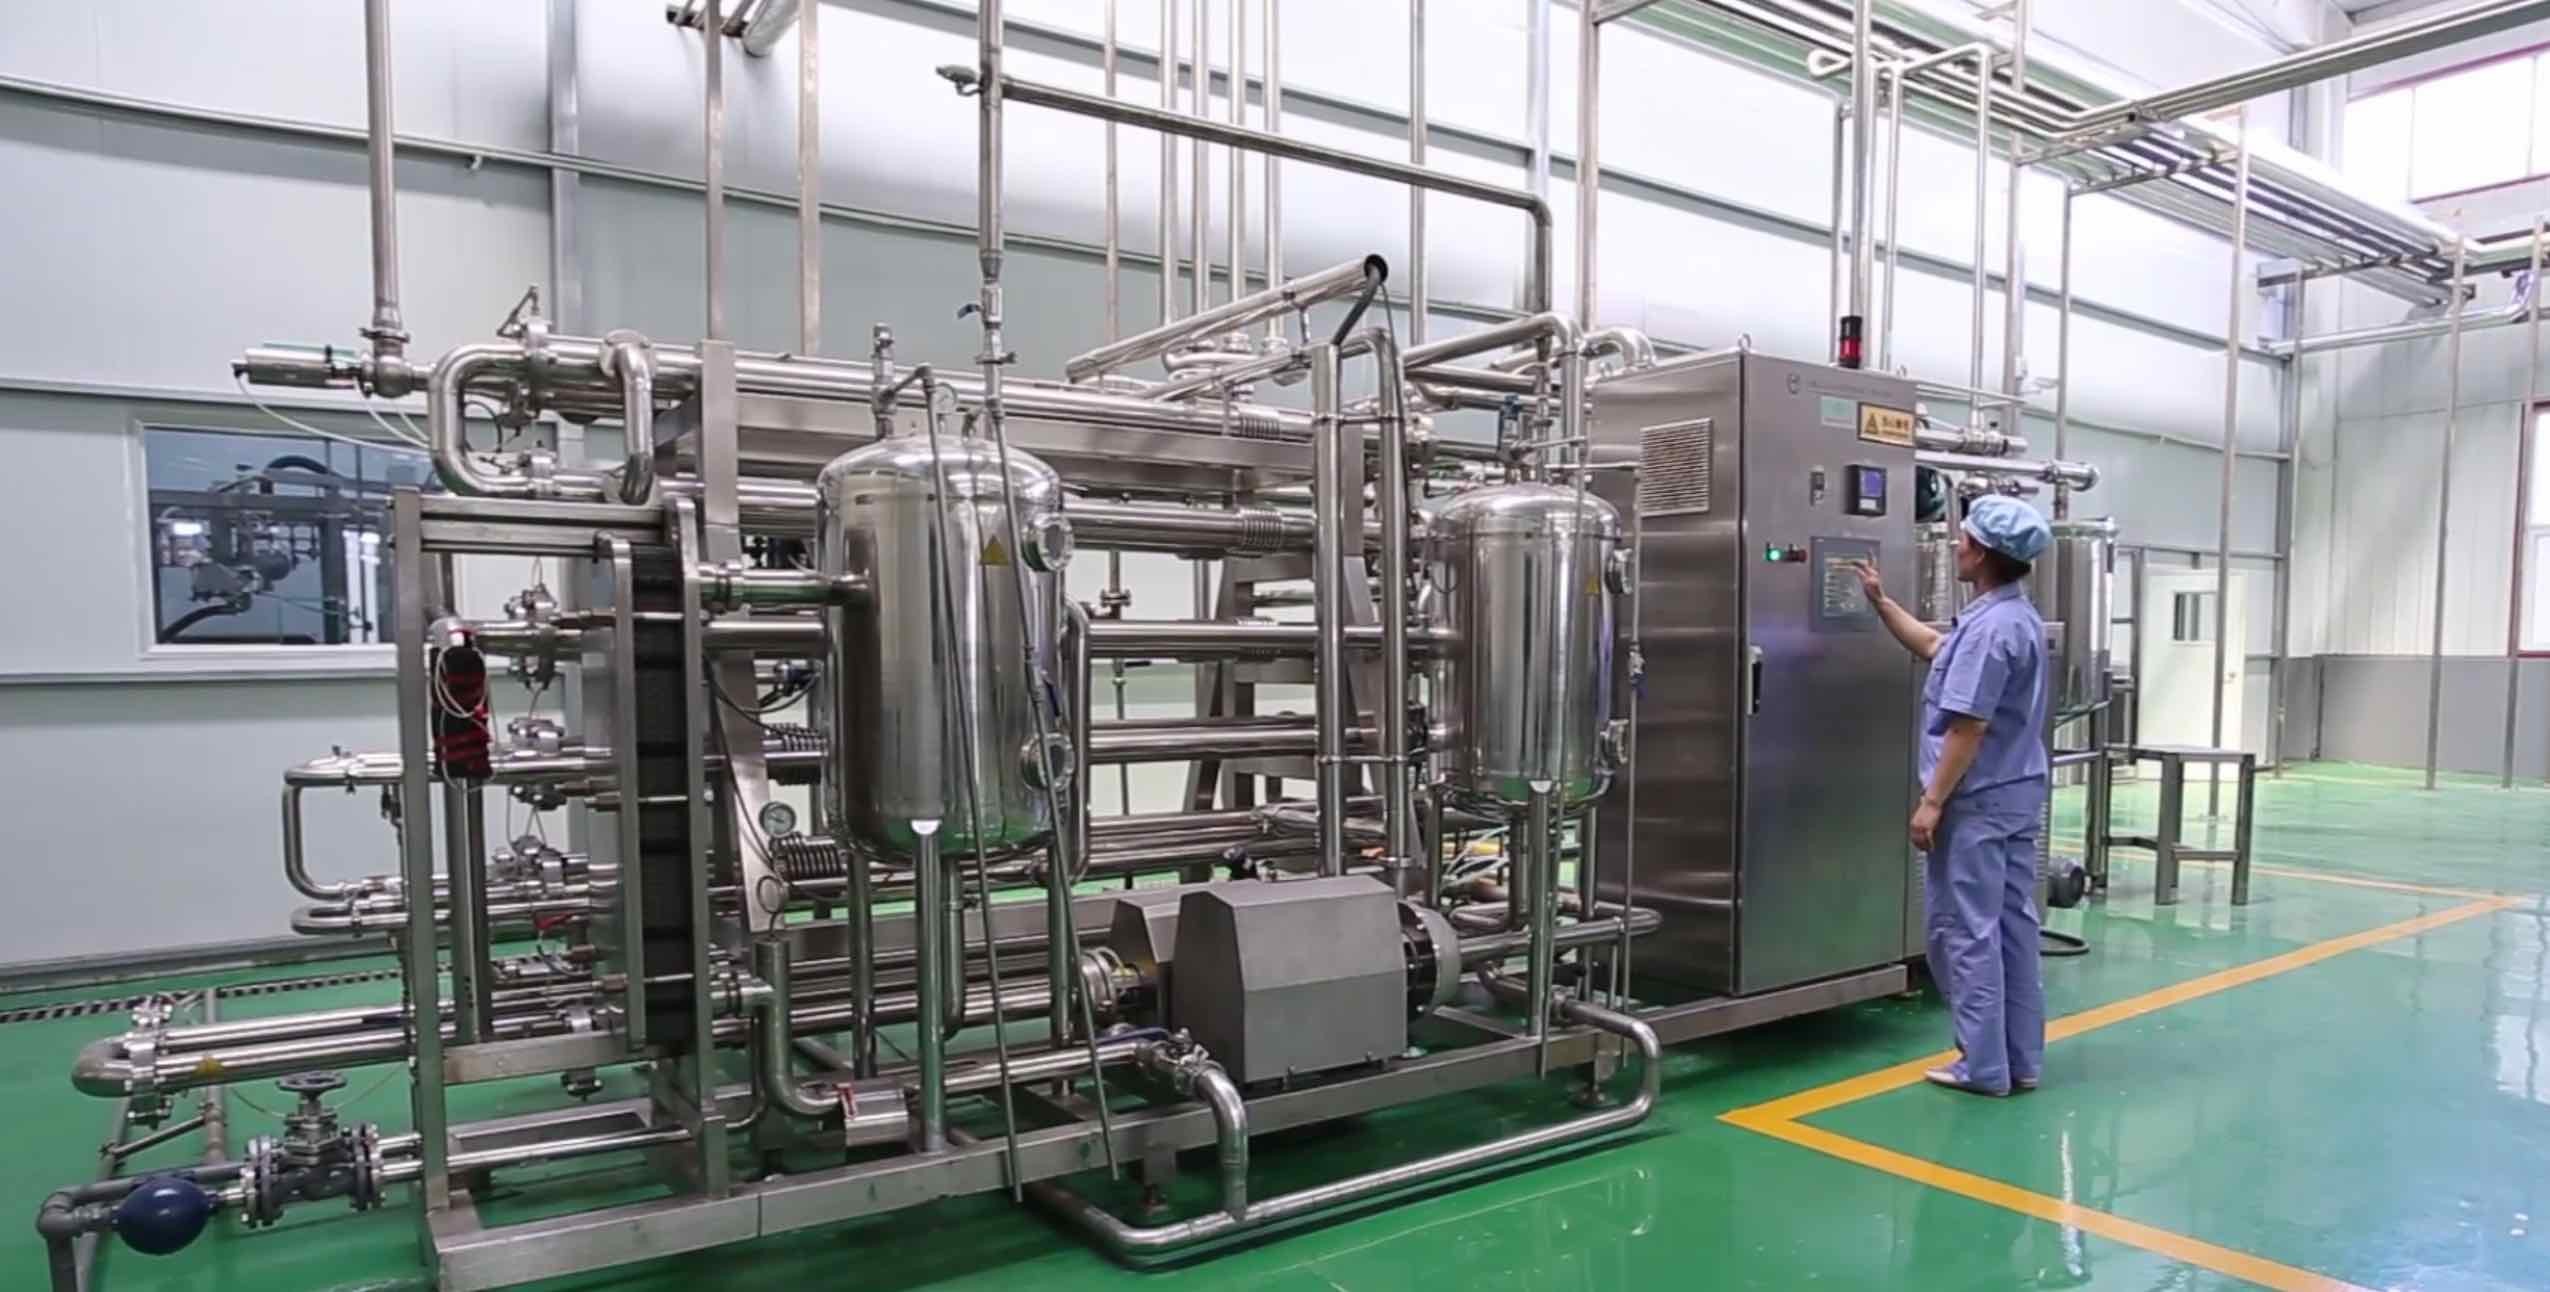 china four side seal packaging machine wholesale 🇨🇳 - alibaba